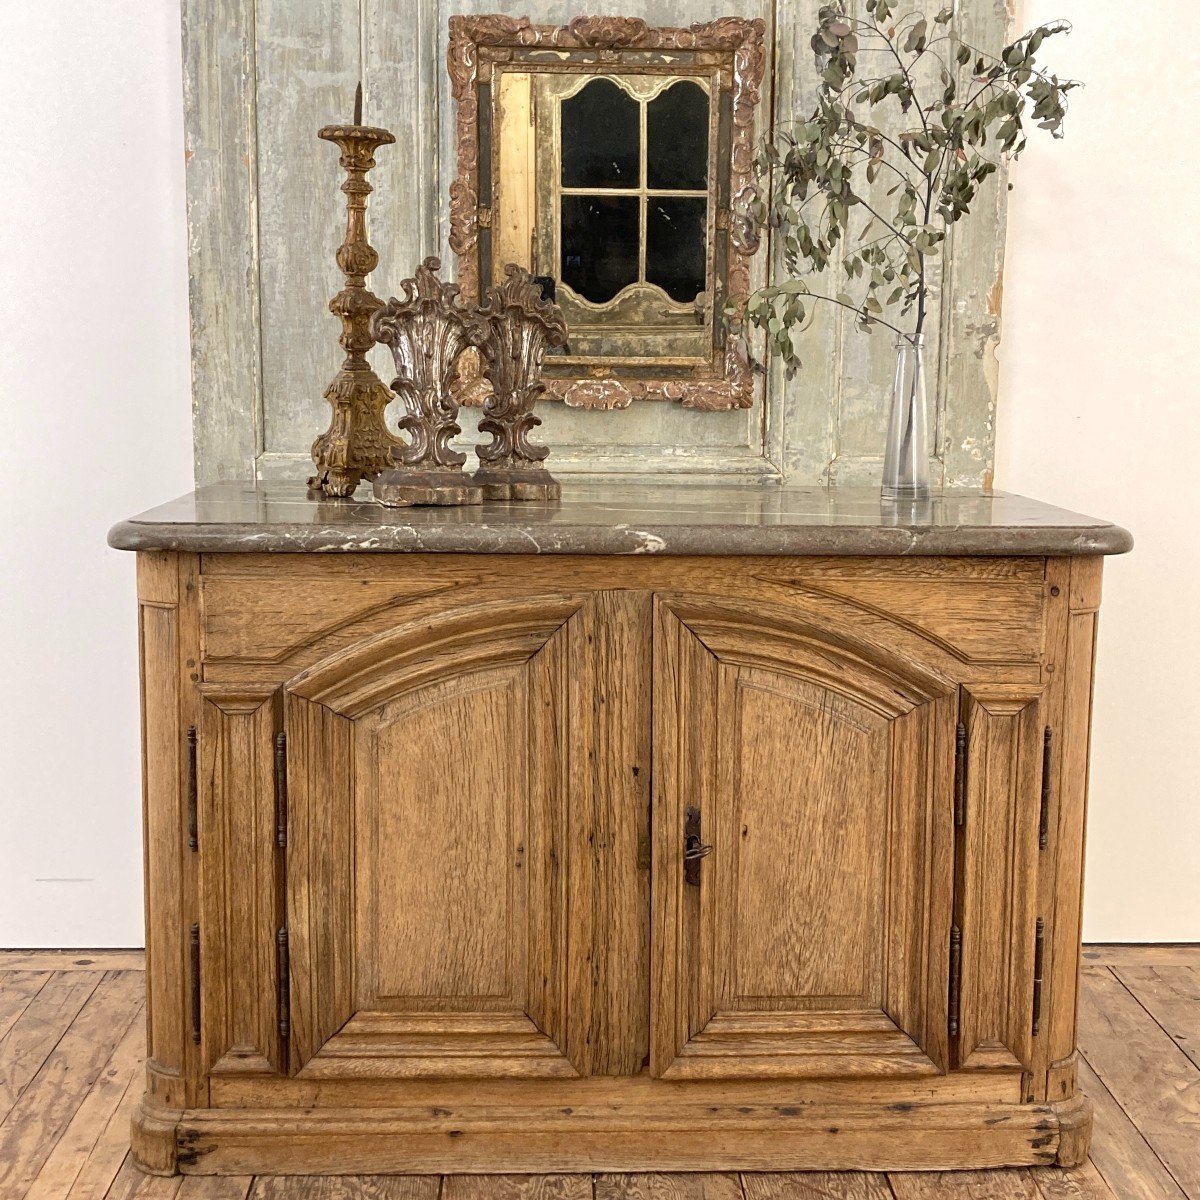 Early 18th Century Hunting Buffet